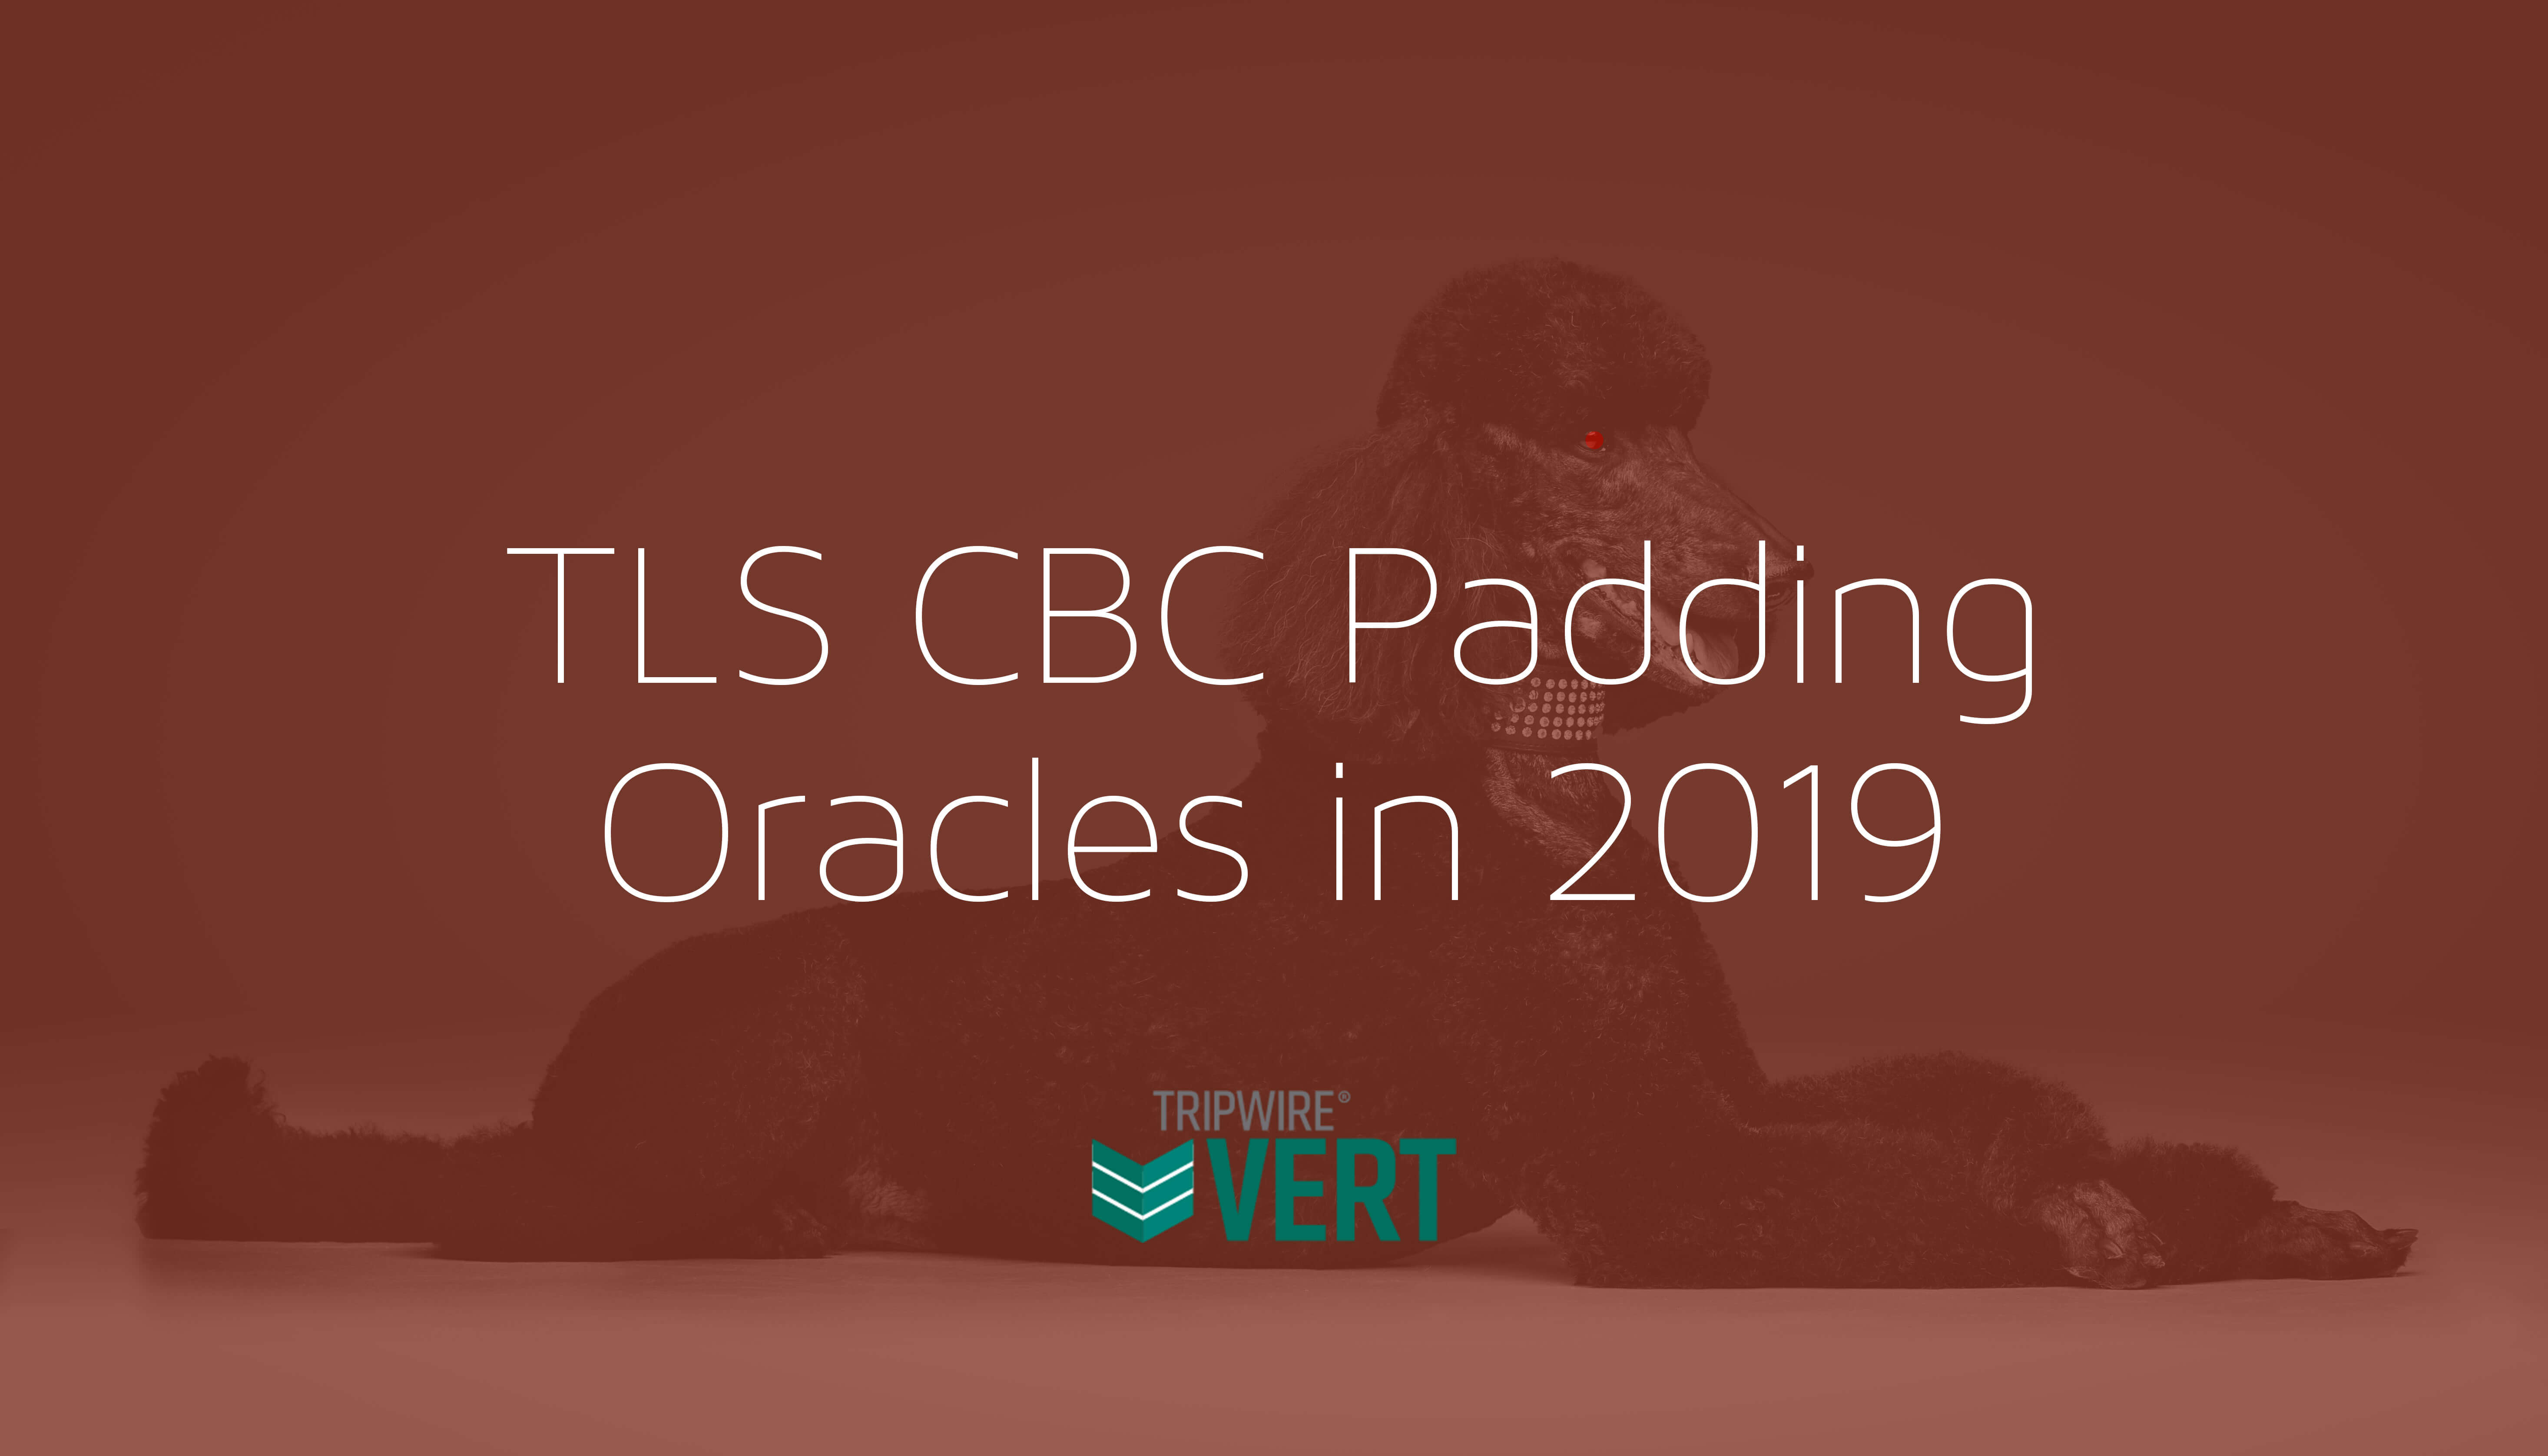 TLS CBC Padding Oracles in 2019